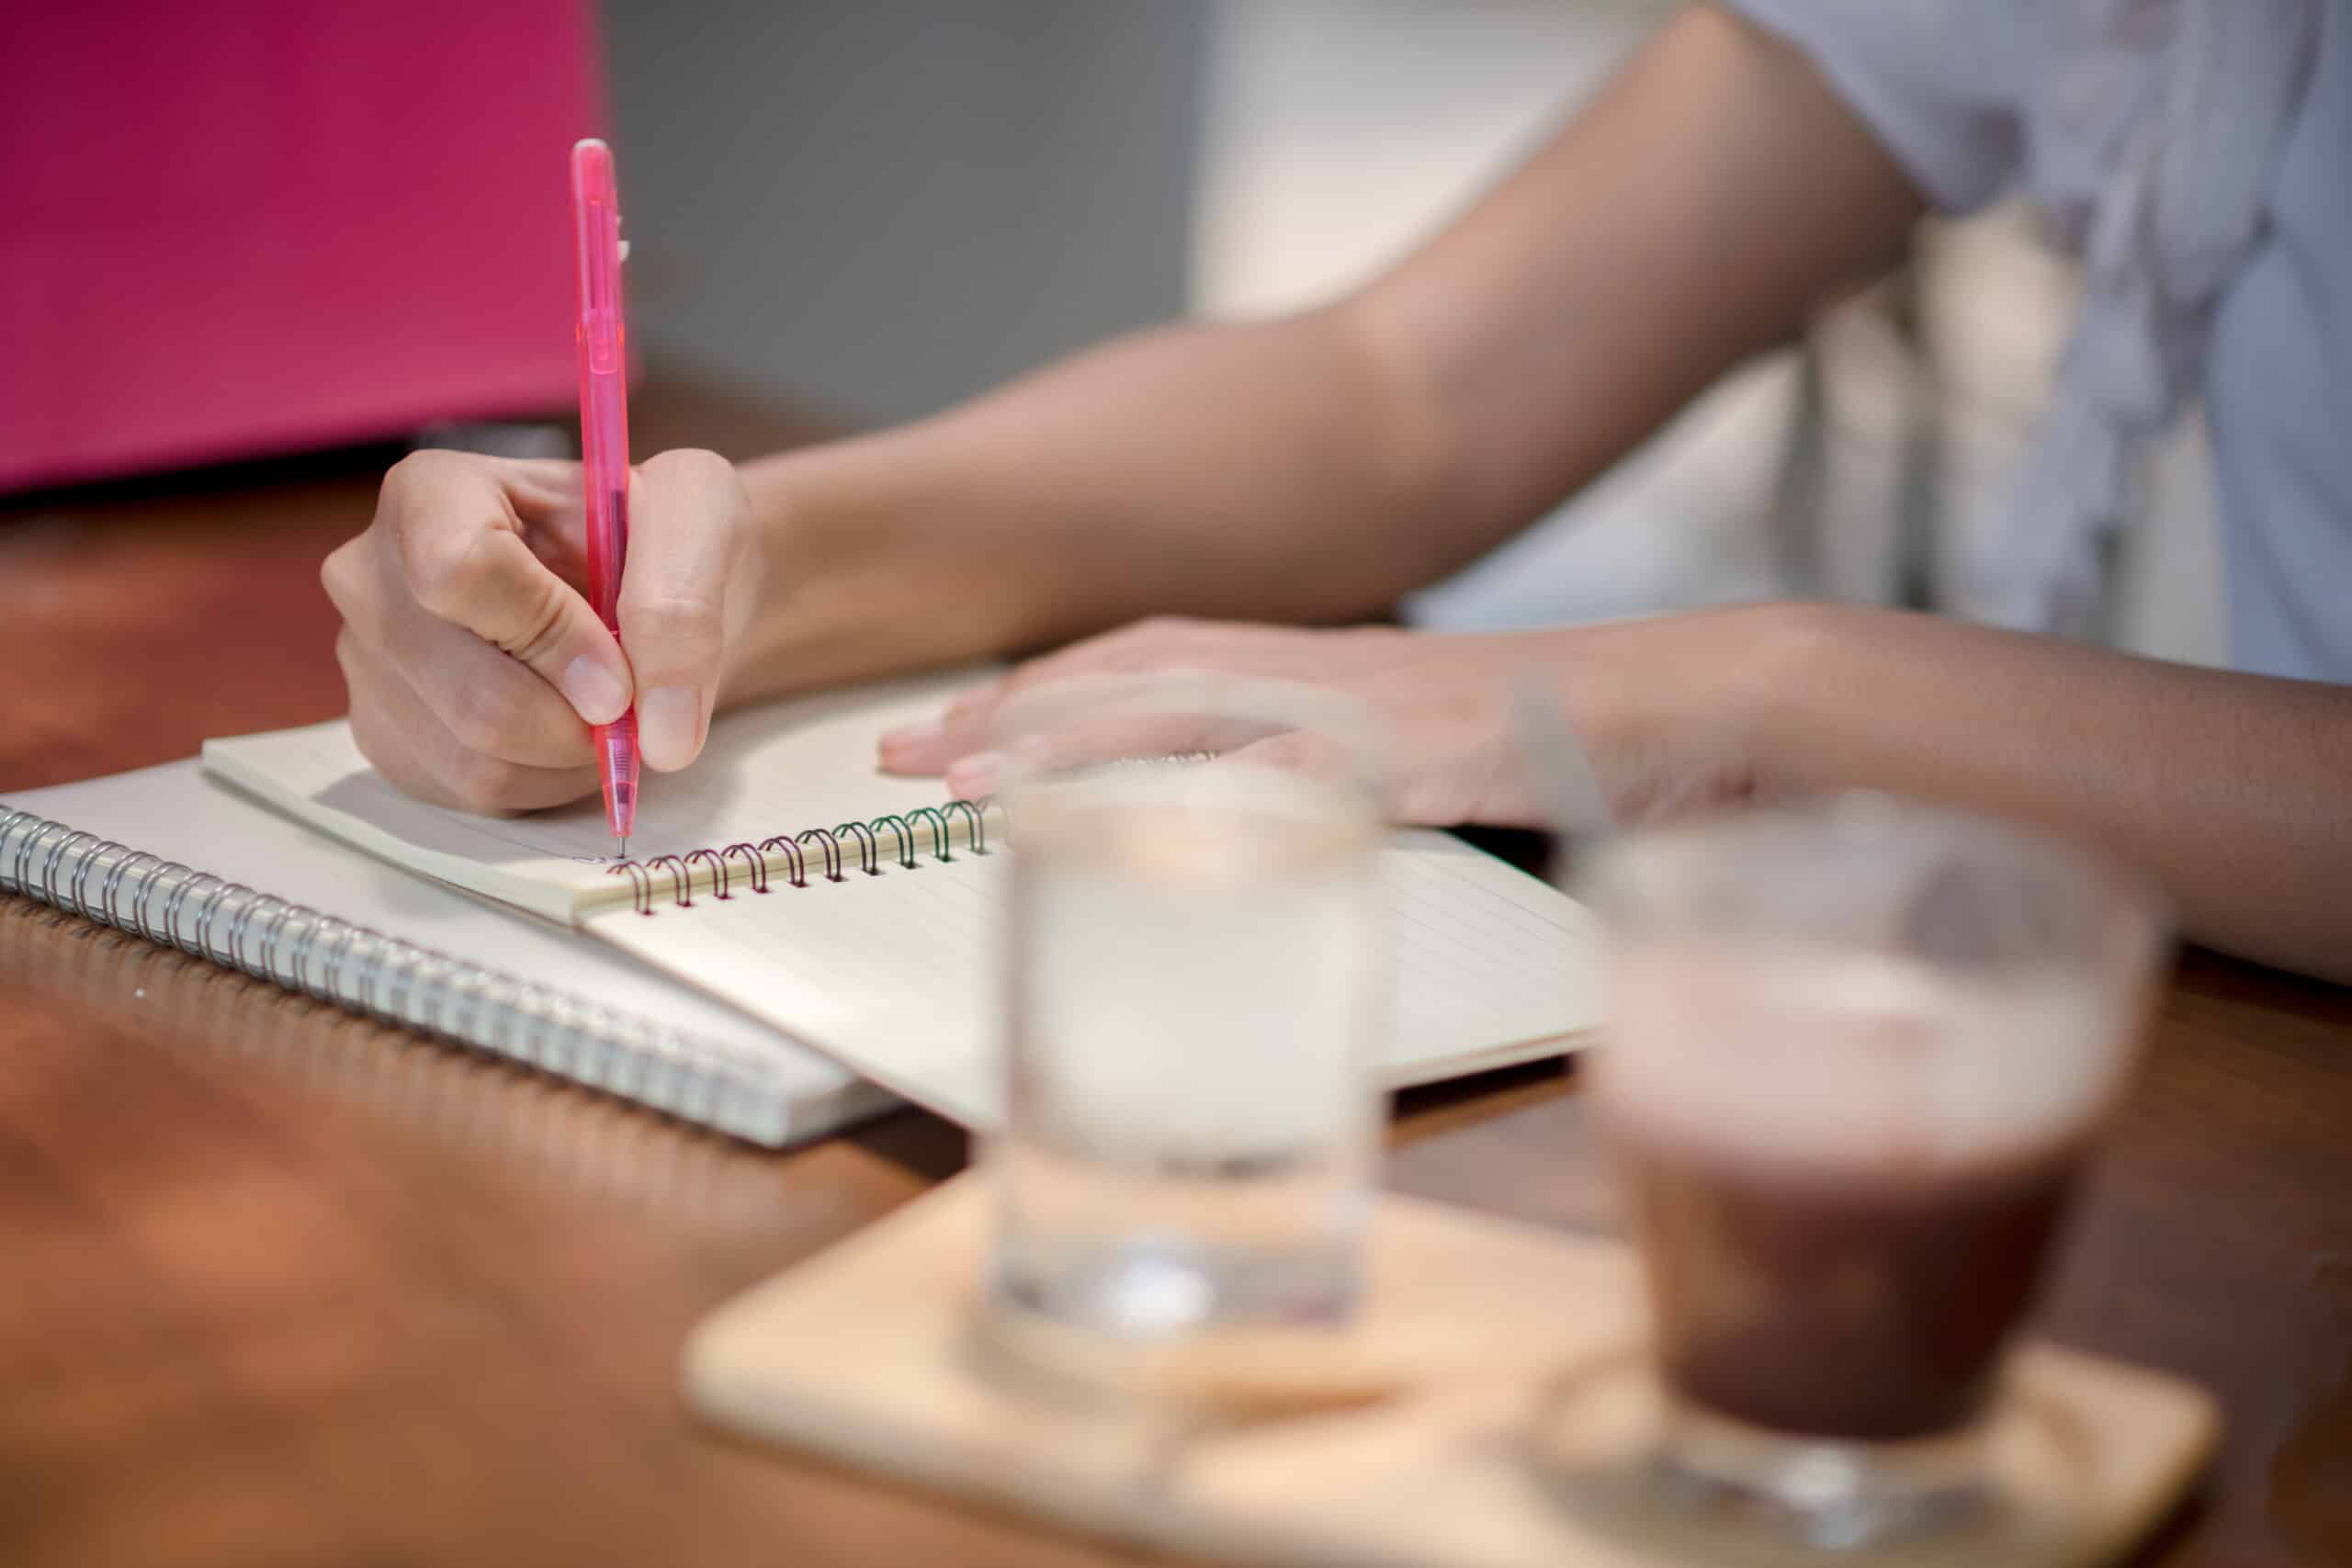 A woman writes with a pencil on a notebook at home.